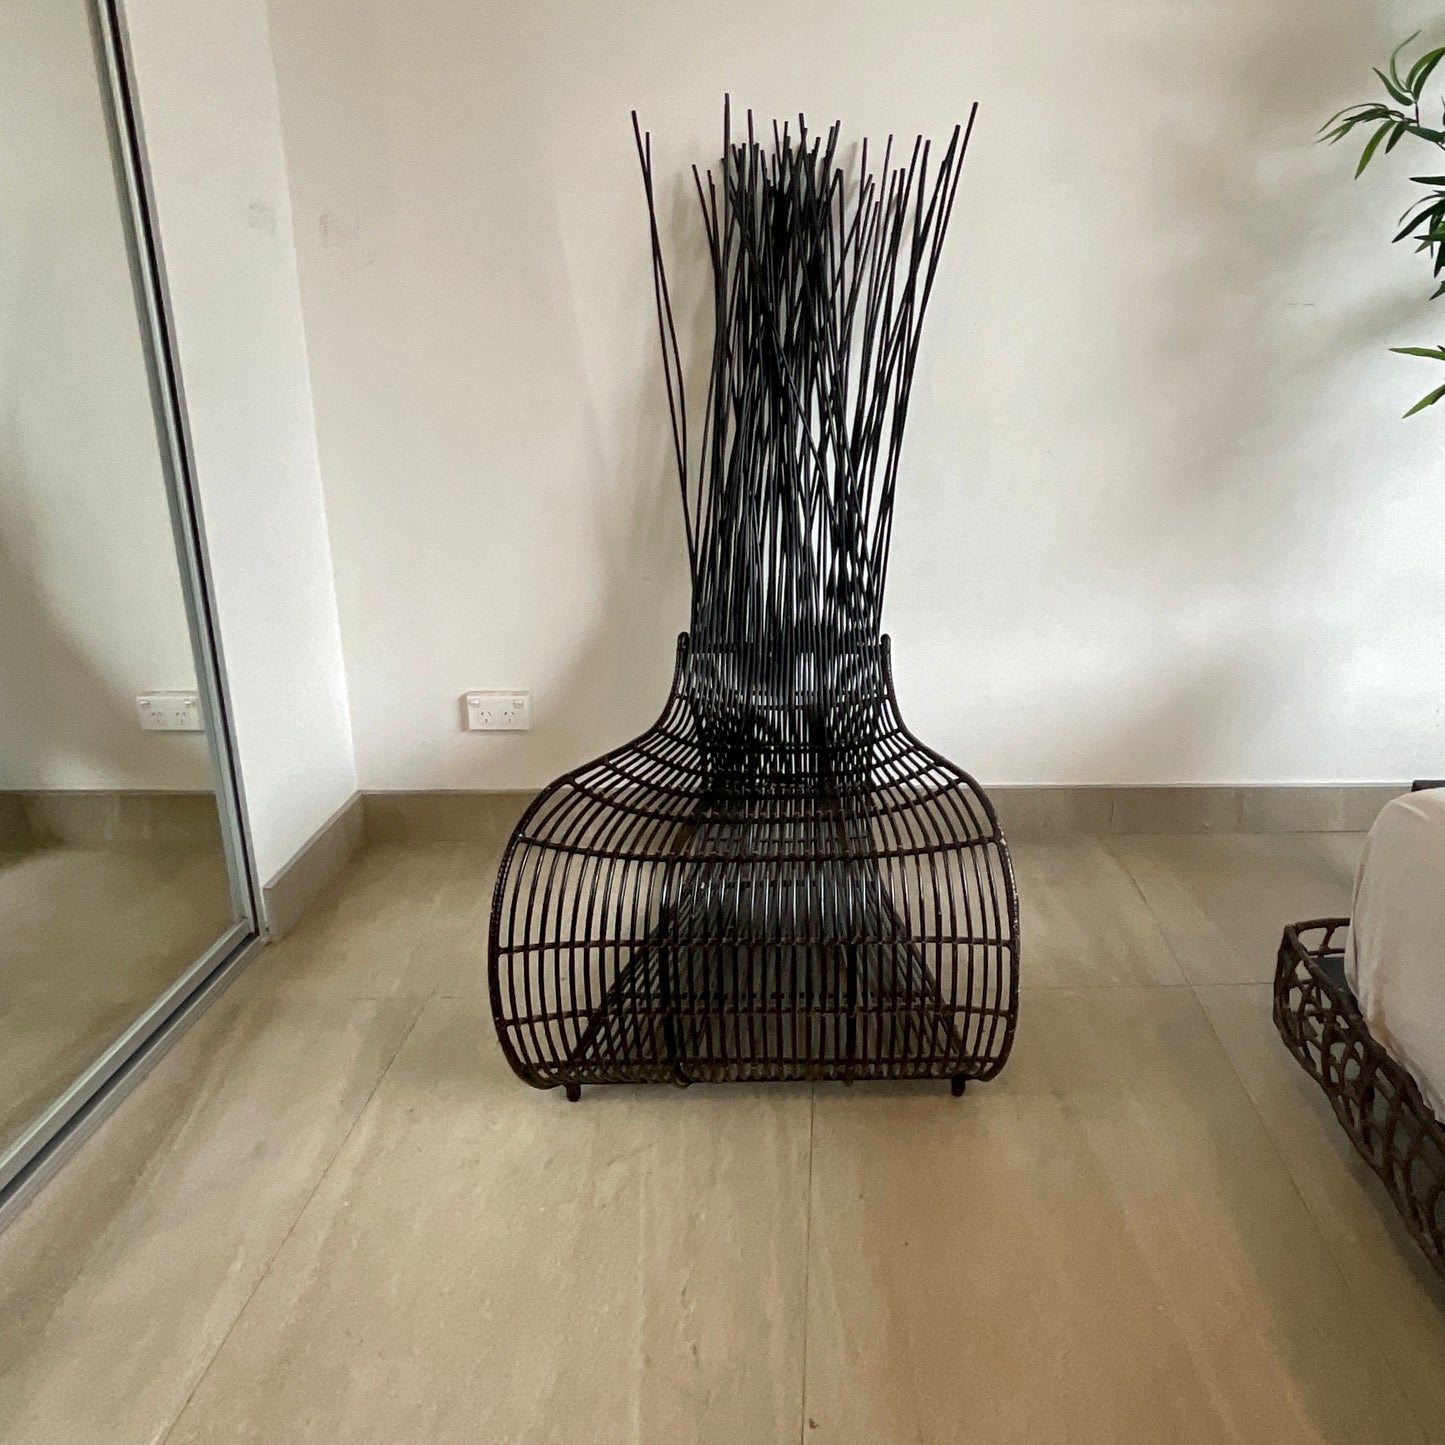 Yoda Chair by Kenneth Cobonpue (2 available)